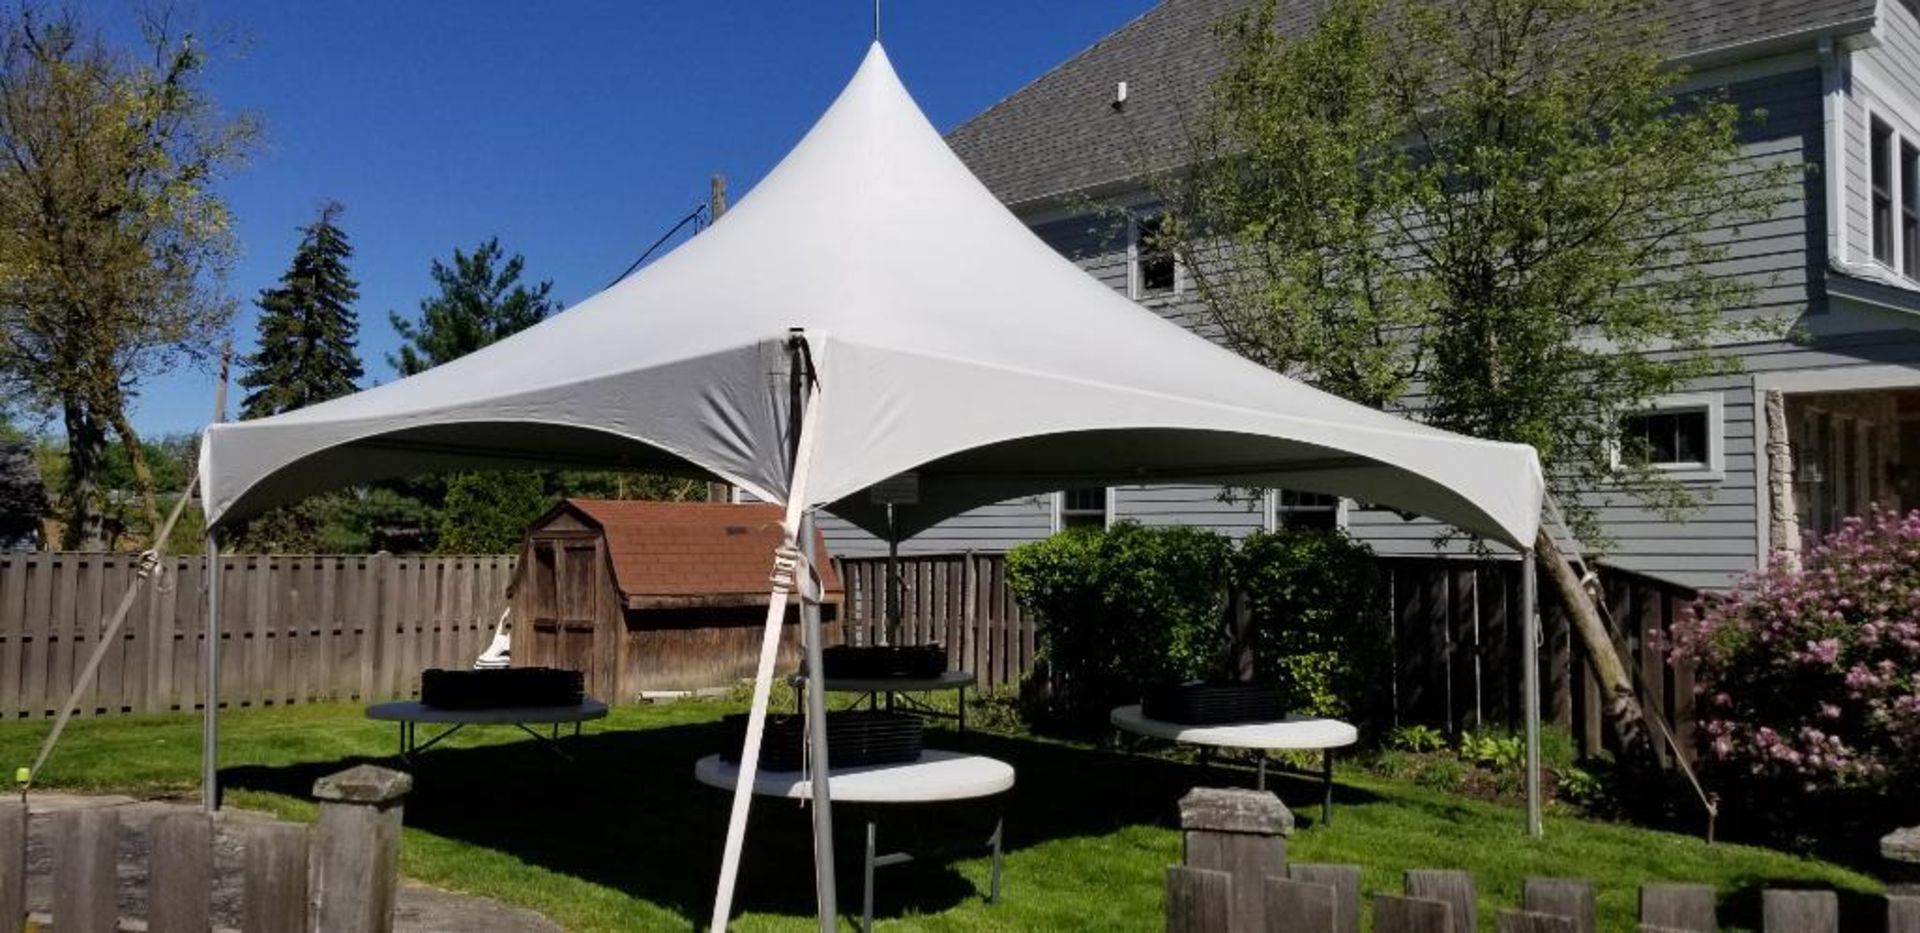 20 ft. x 20 ft. PINNACLE Hi Peak Frame Tent - Complete (sidewalls and rain gutters lots available)